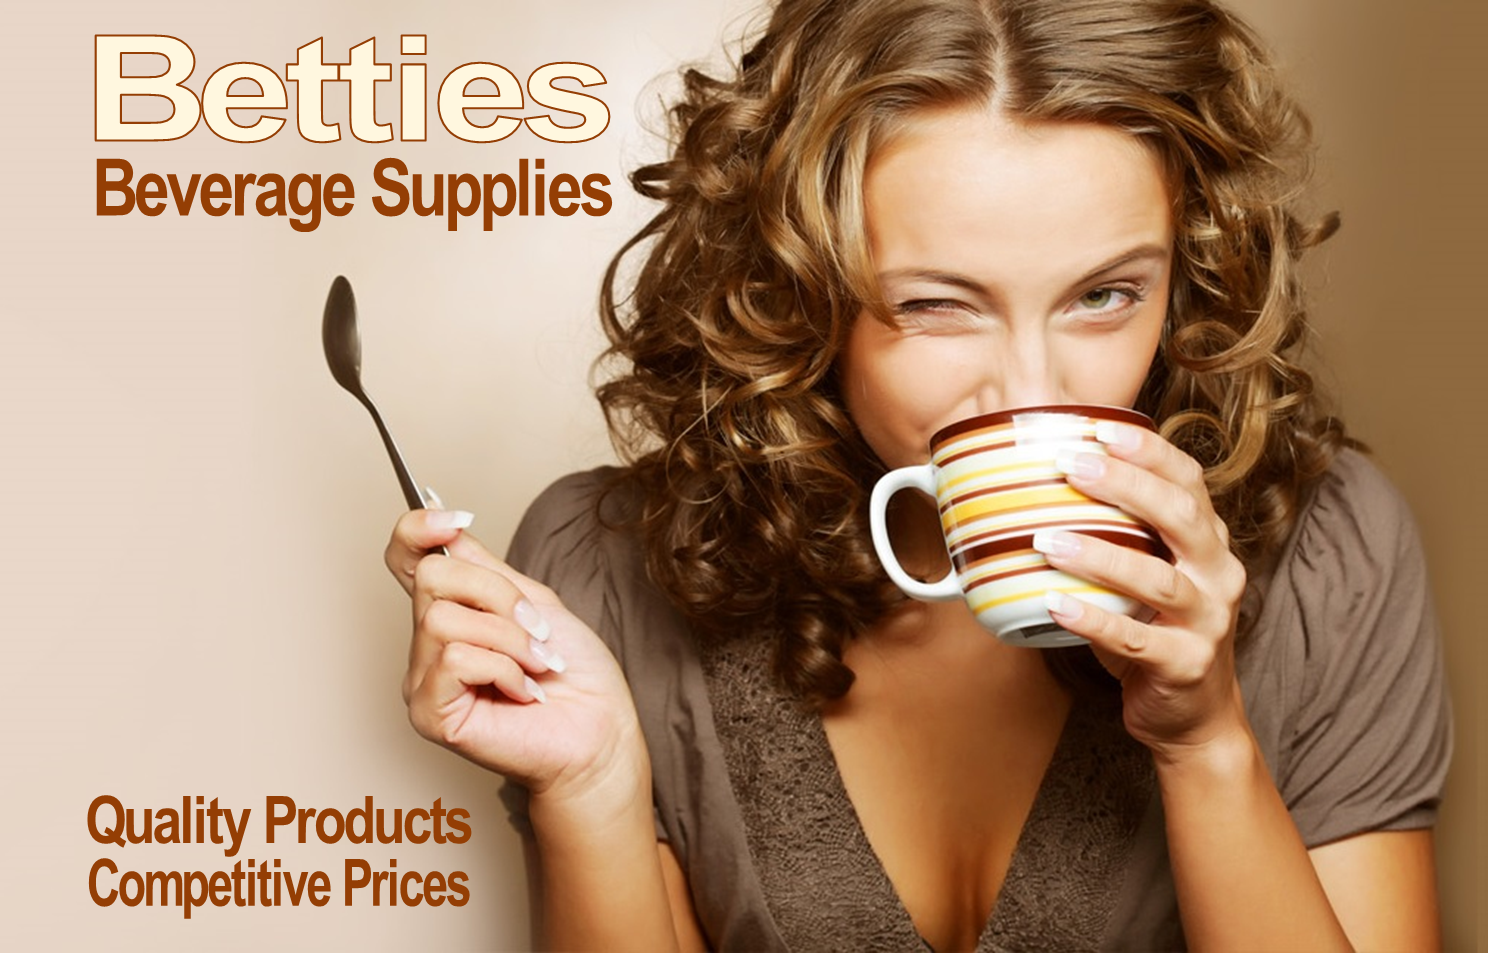 Local Deals in Birmingham on Teas, coffees and other beverages with Betties Beverages